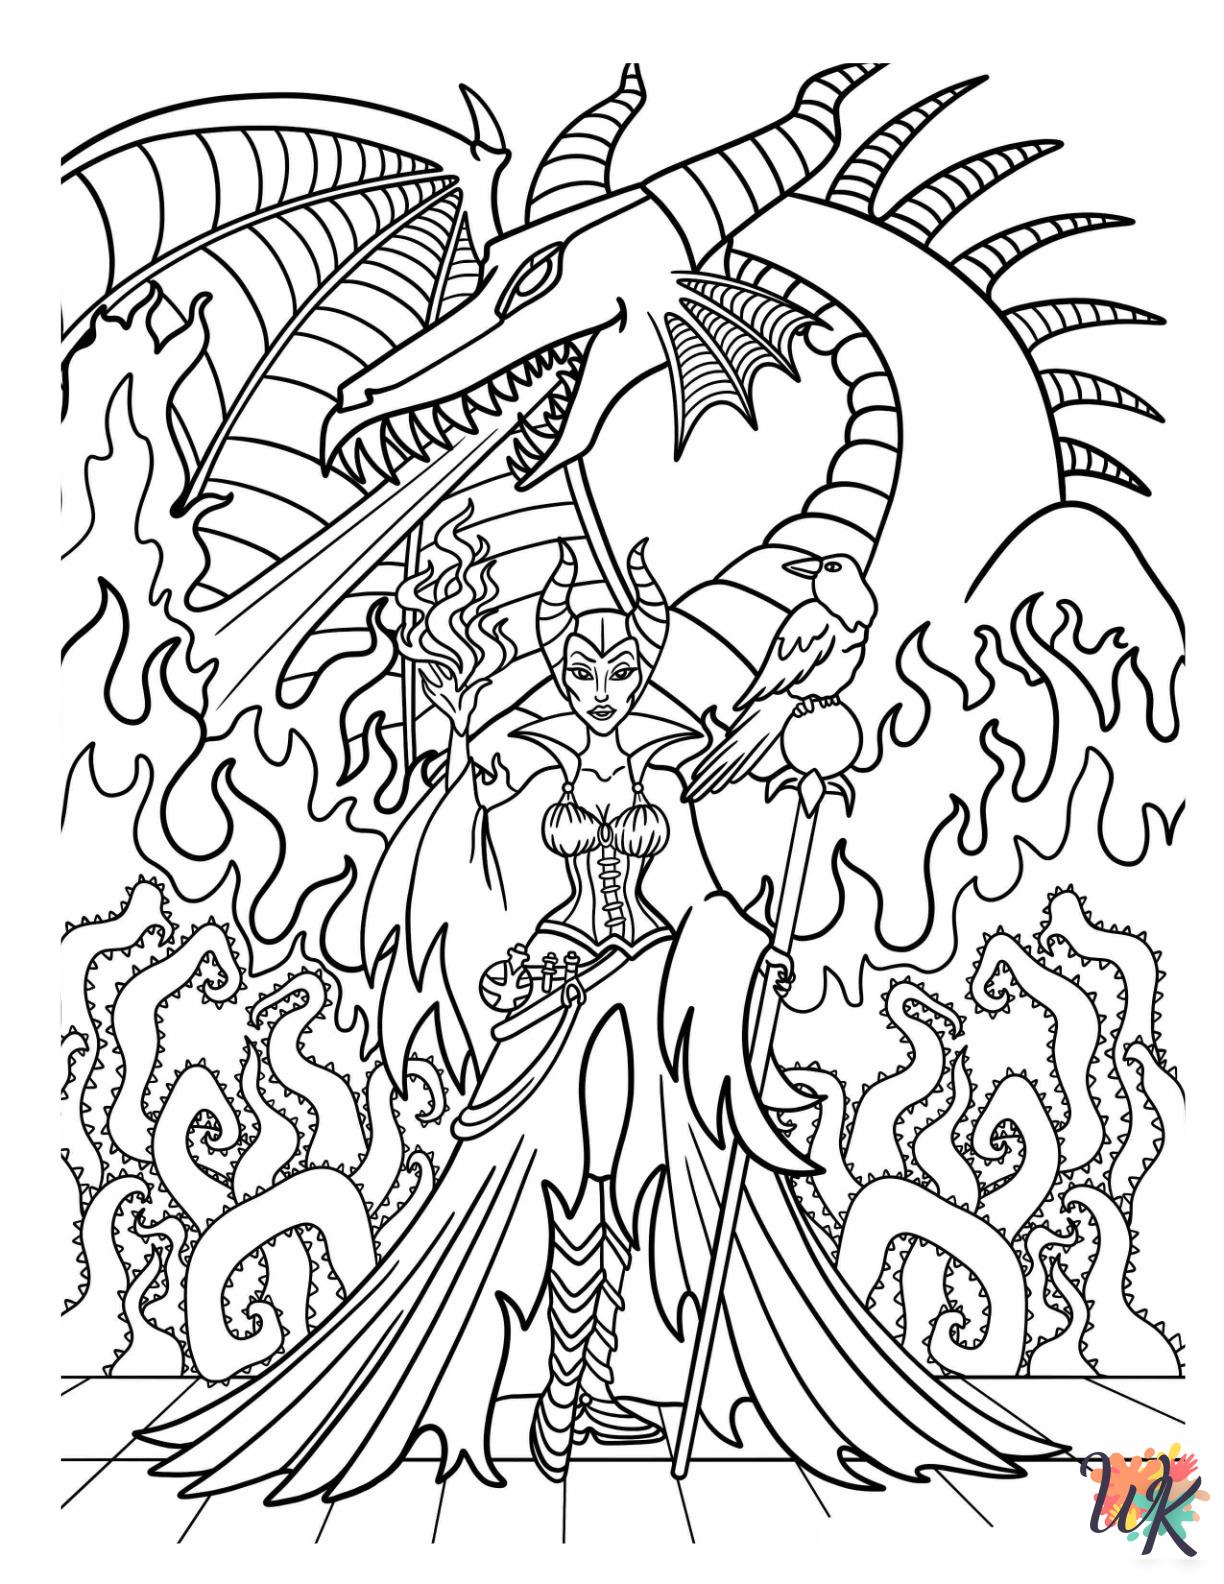 fun Maleficent coloring pages